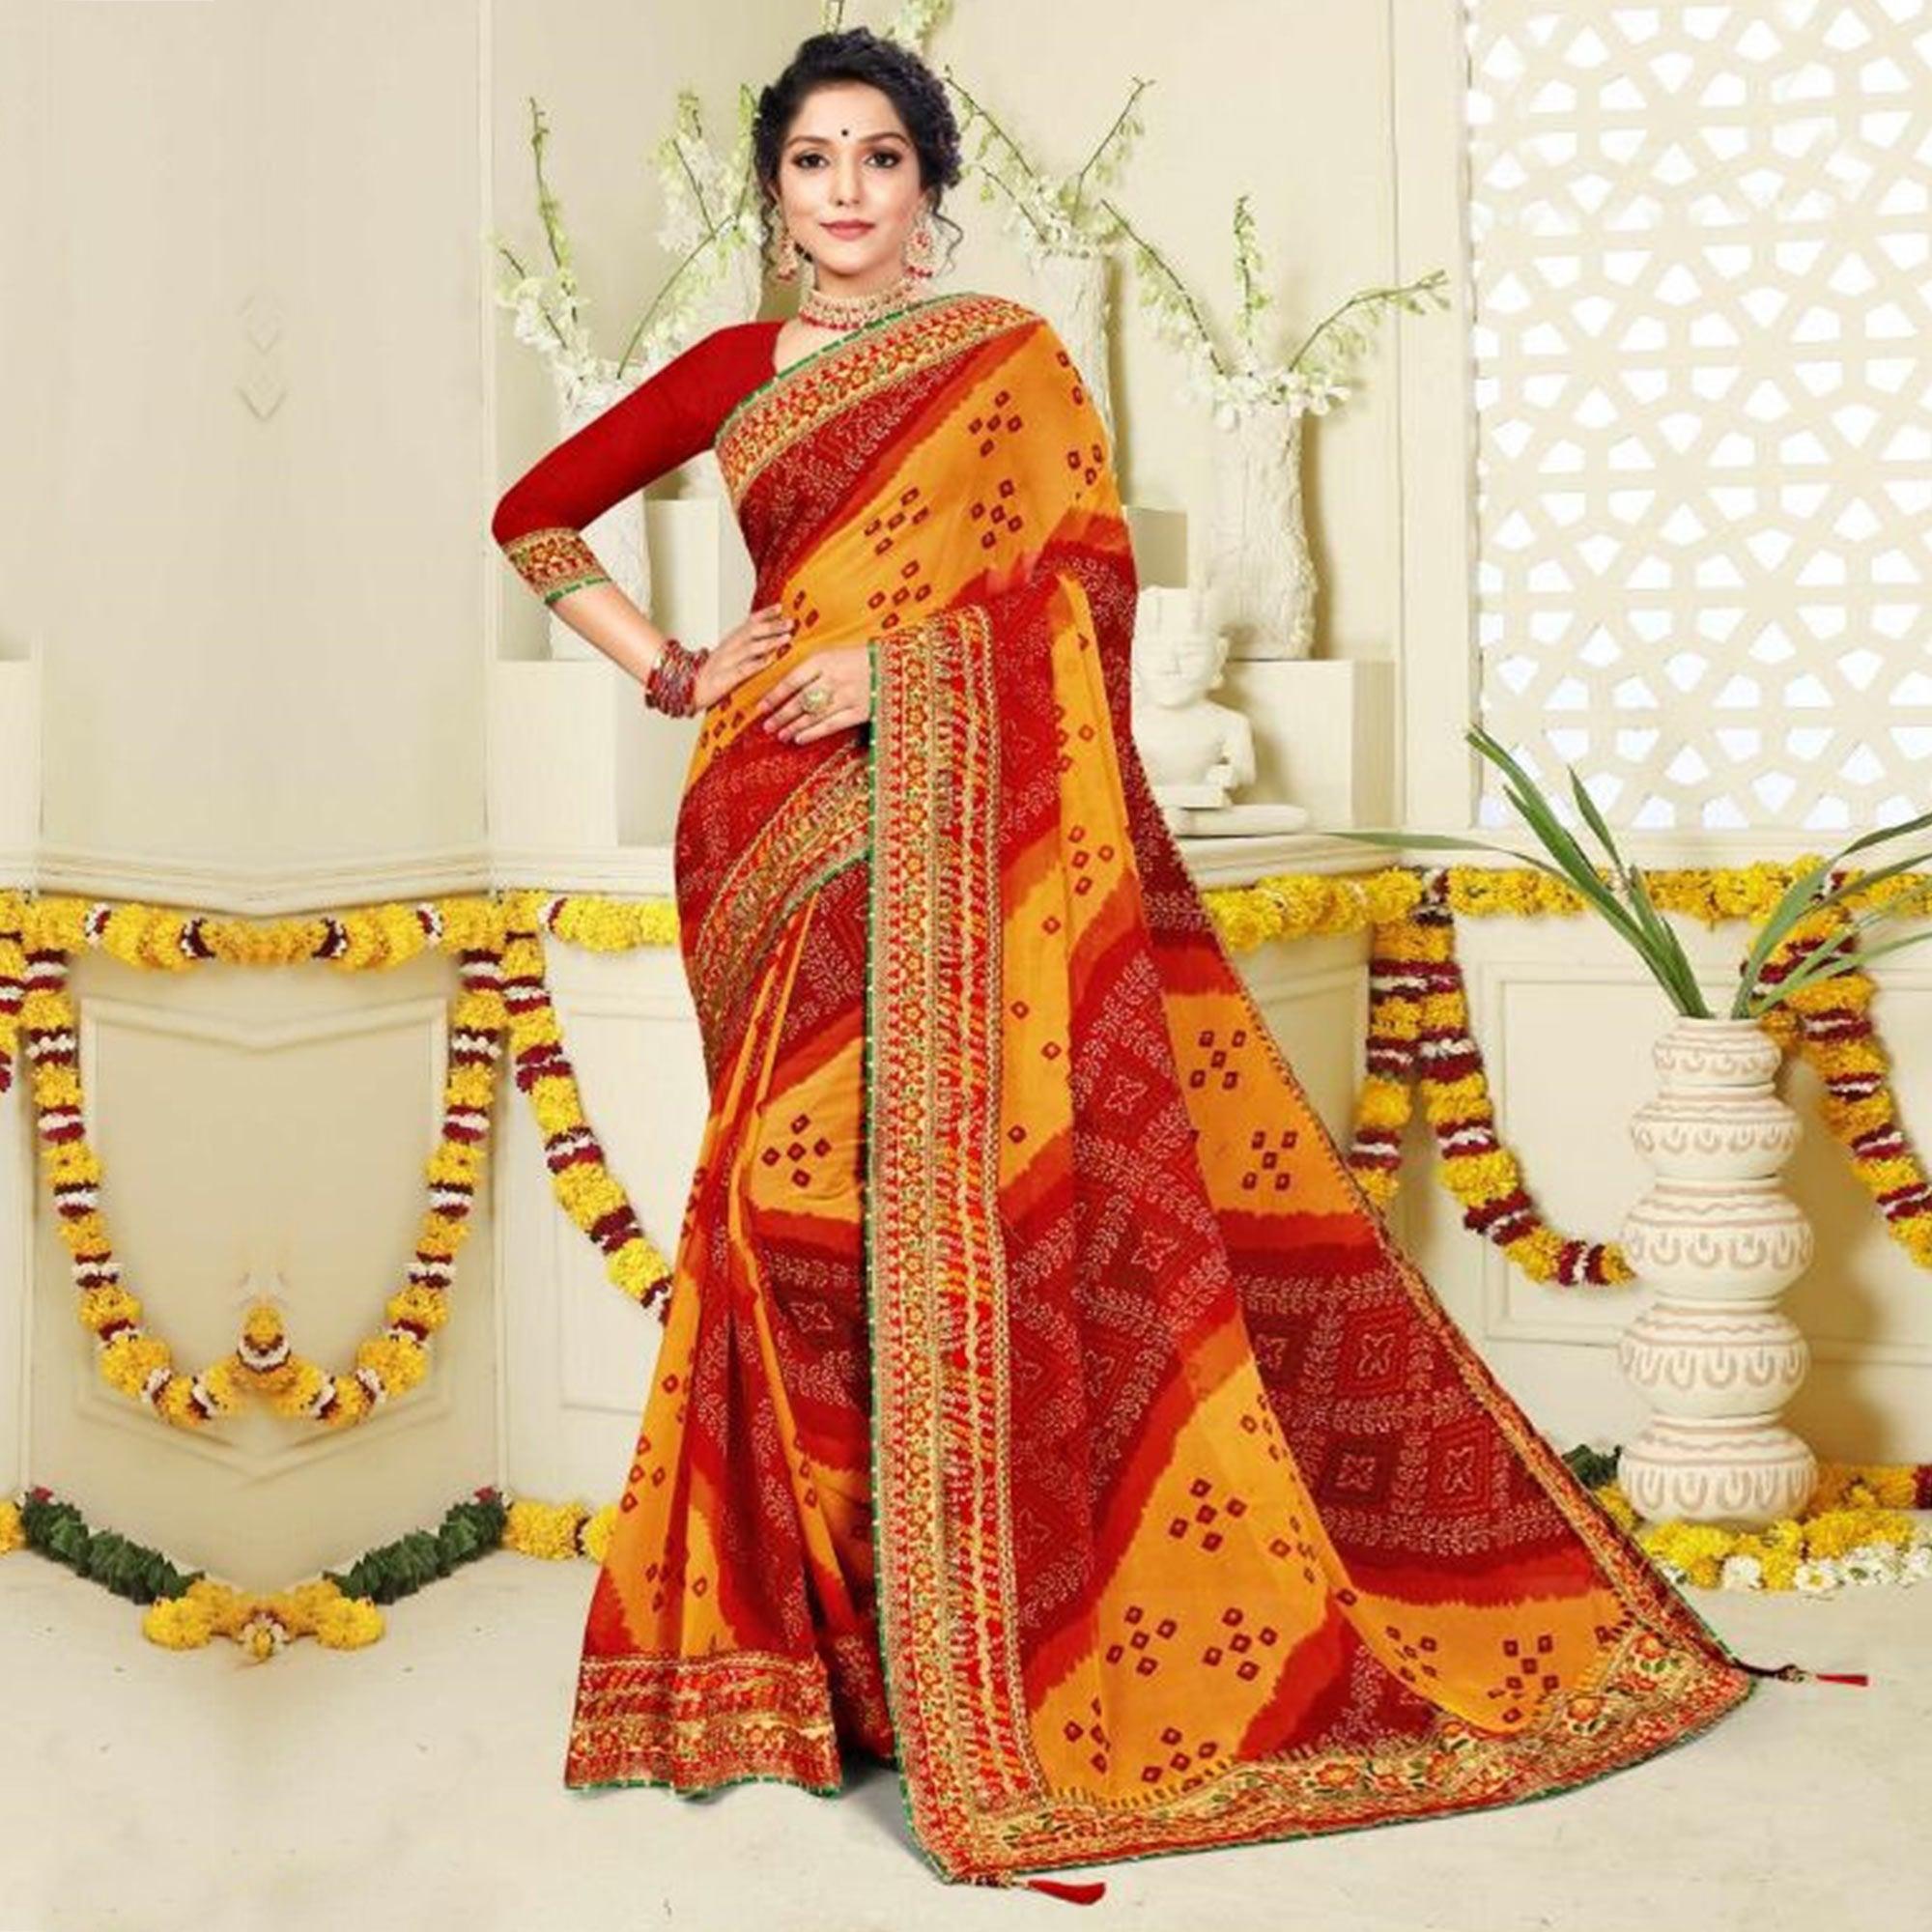 Amazing Red and Yellow Colored Festive Wear Bandhani Print With Zari Border Work And Latkan Heavy Georgette Saree - Peachmode